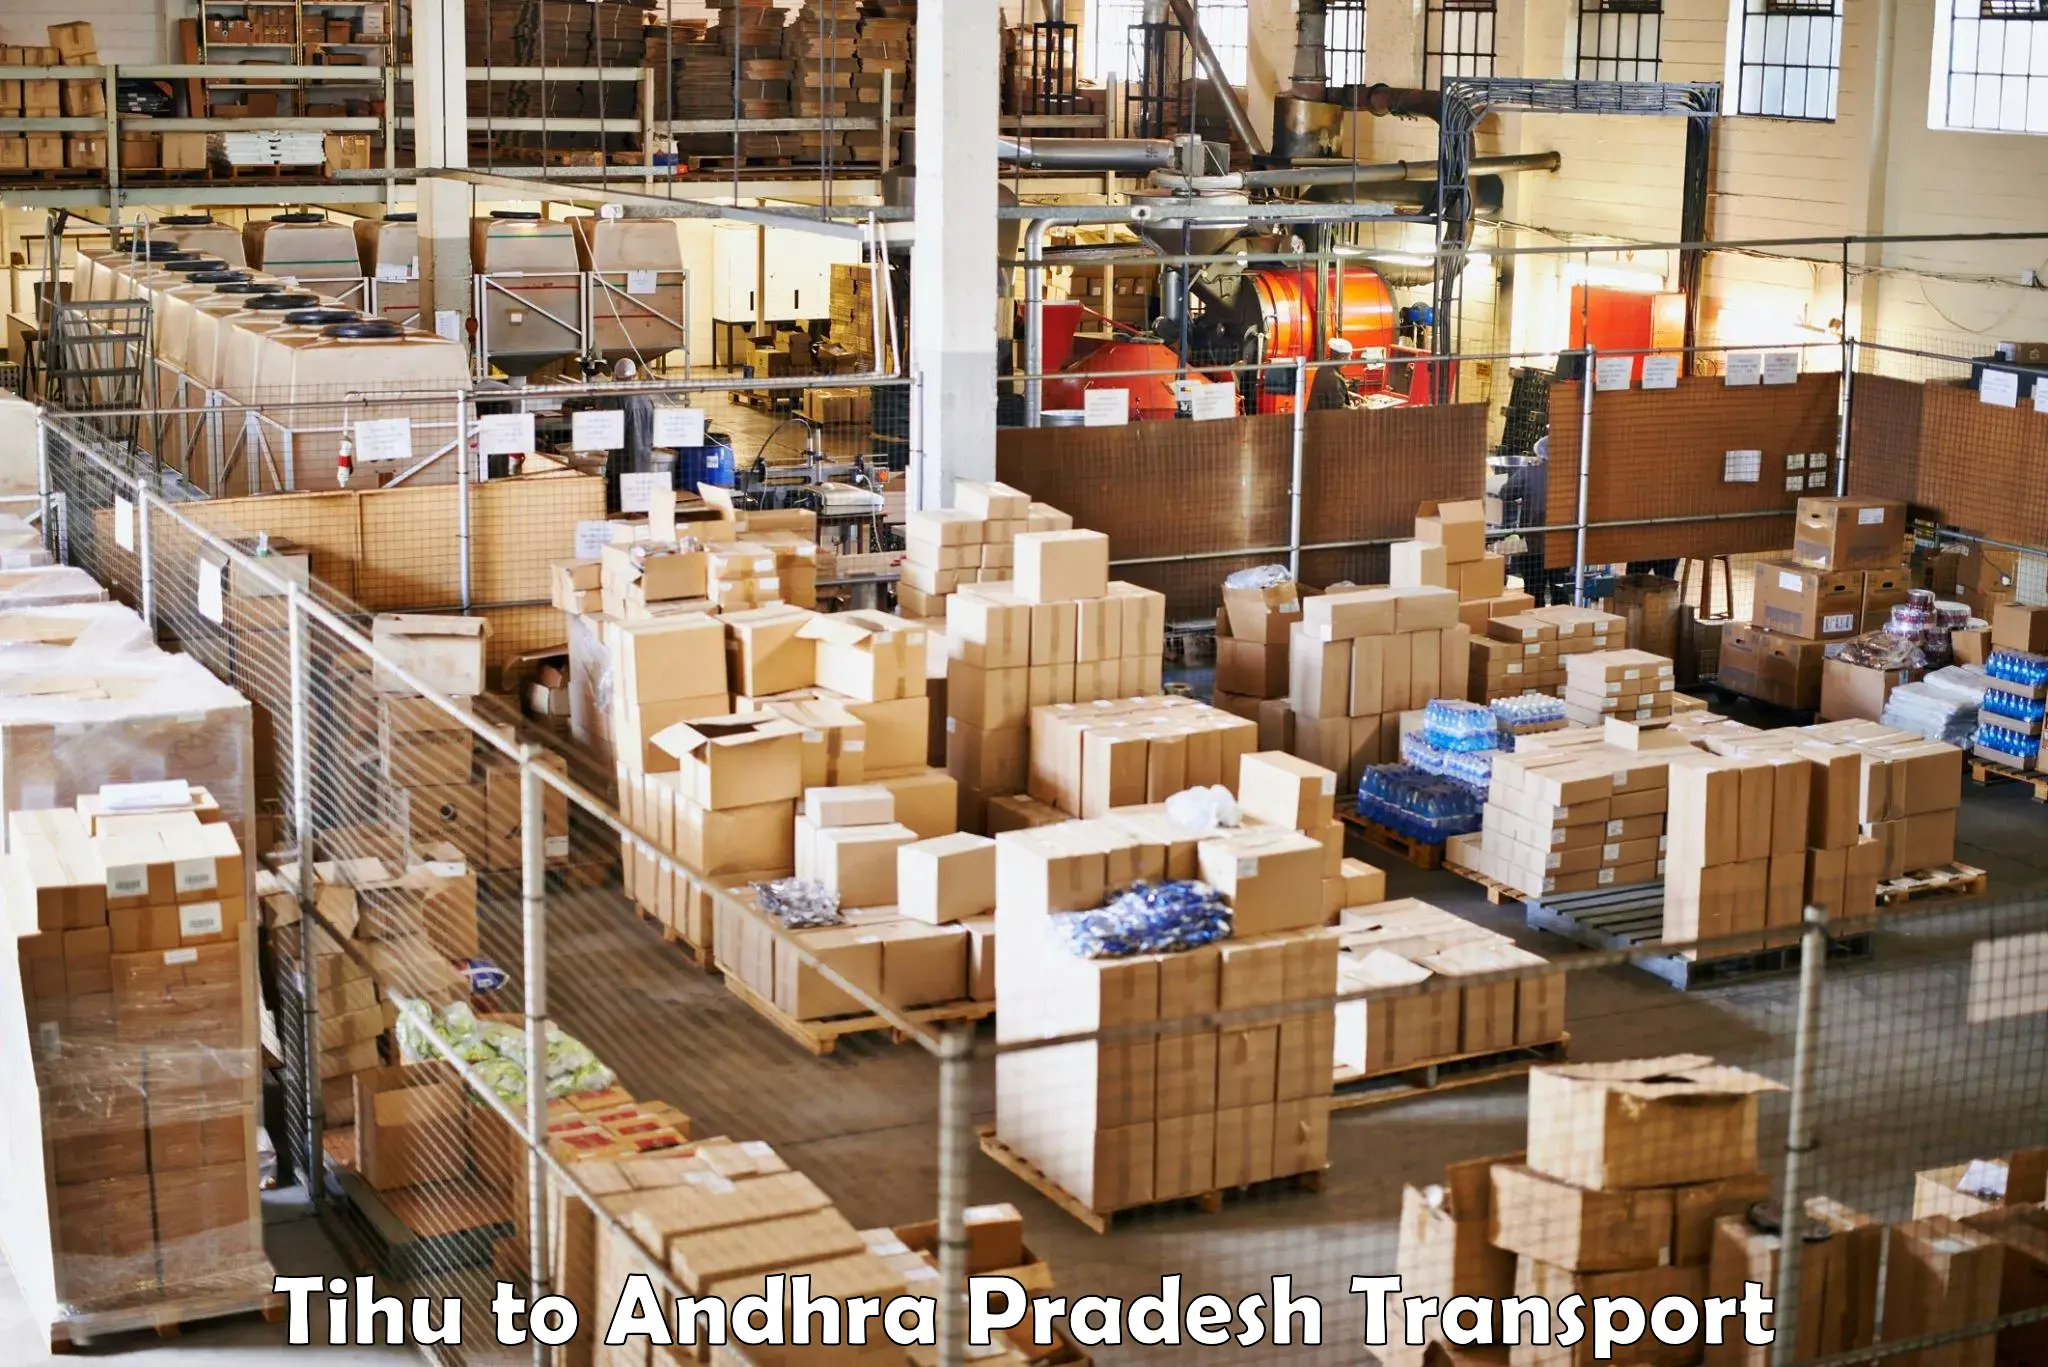 Part load transport service in India Tihu to Chintapalli